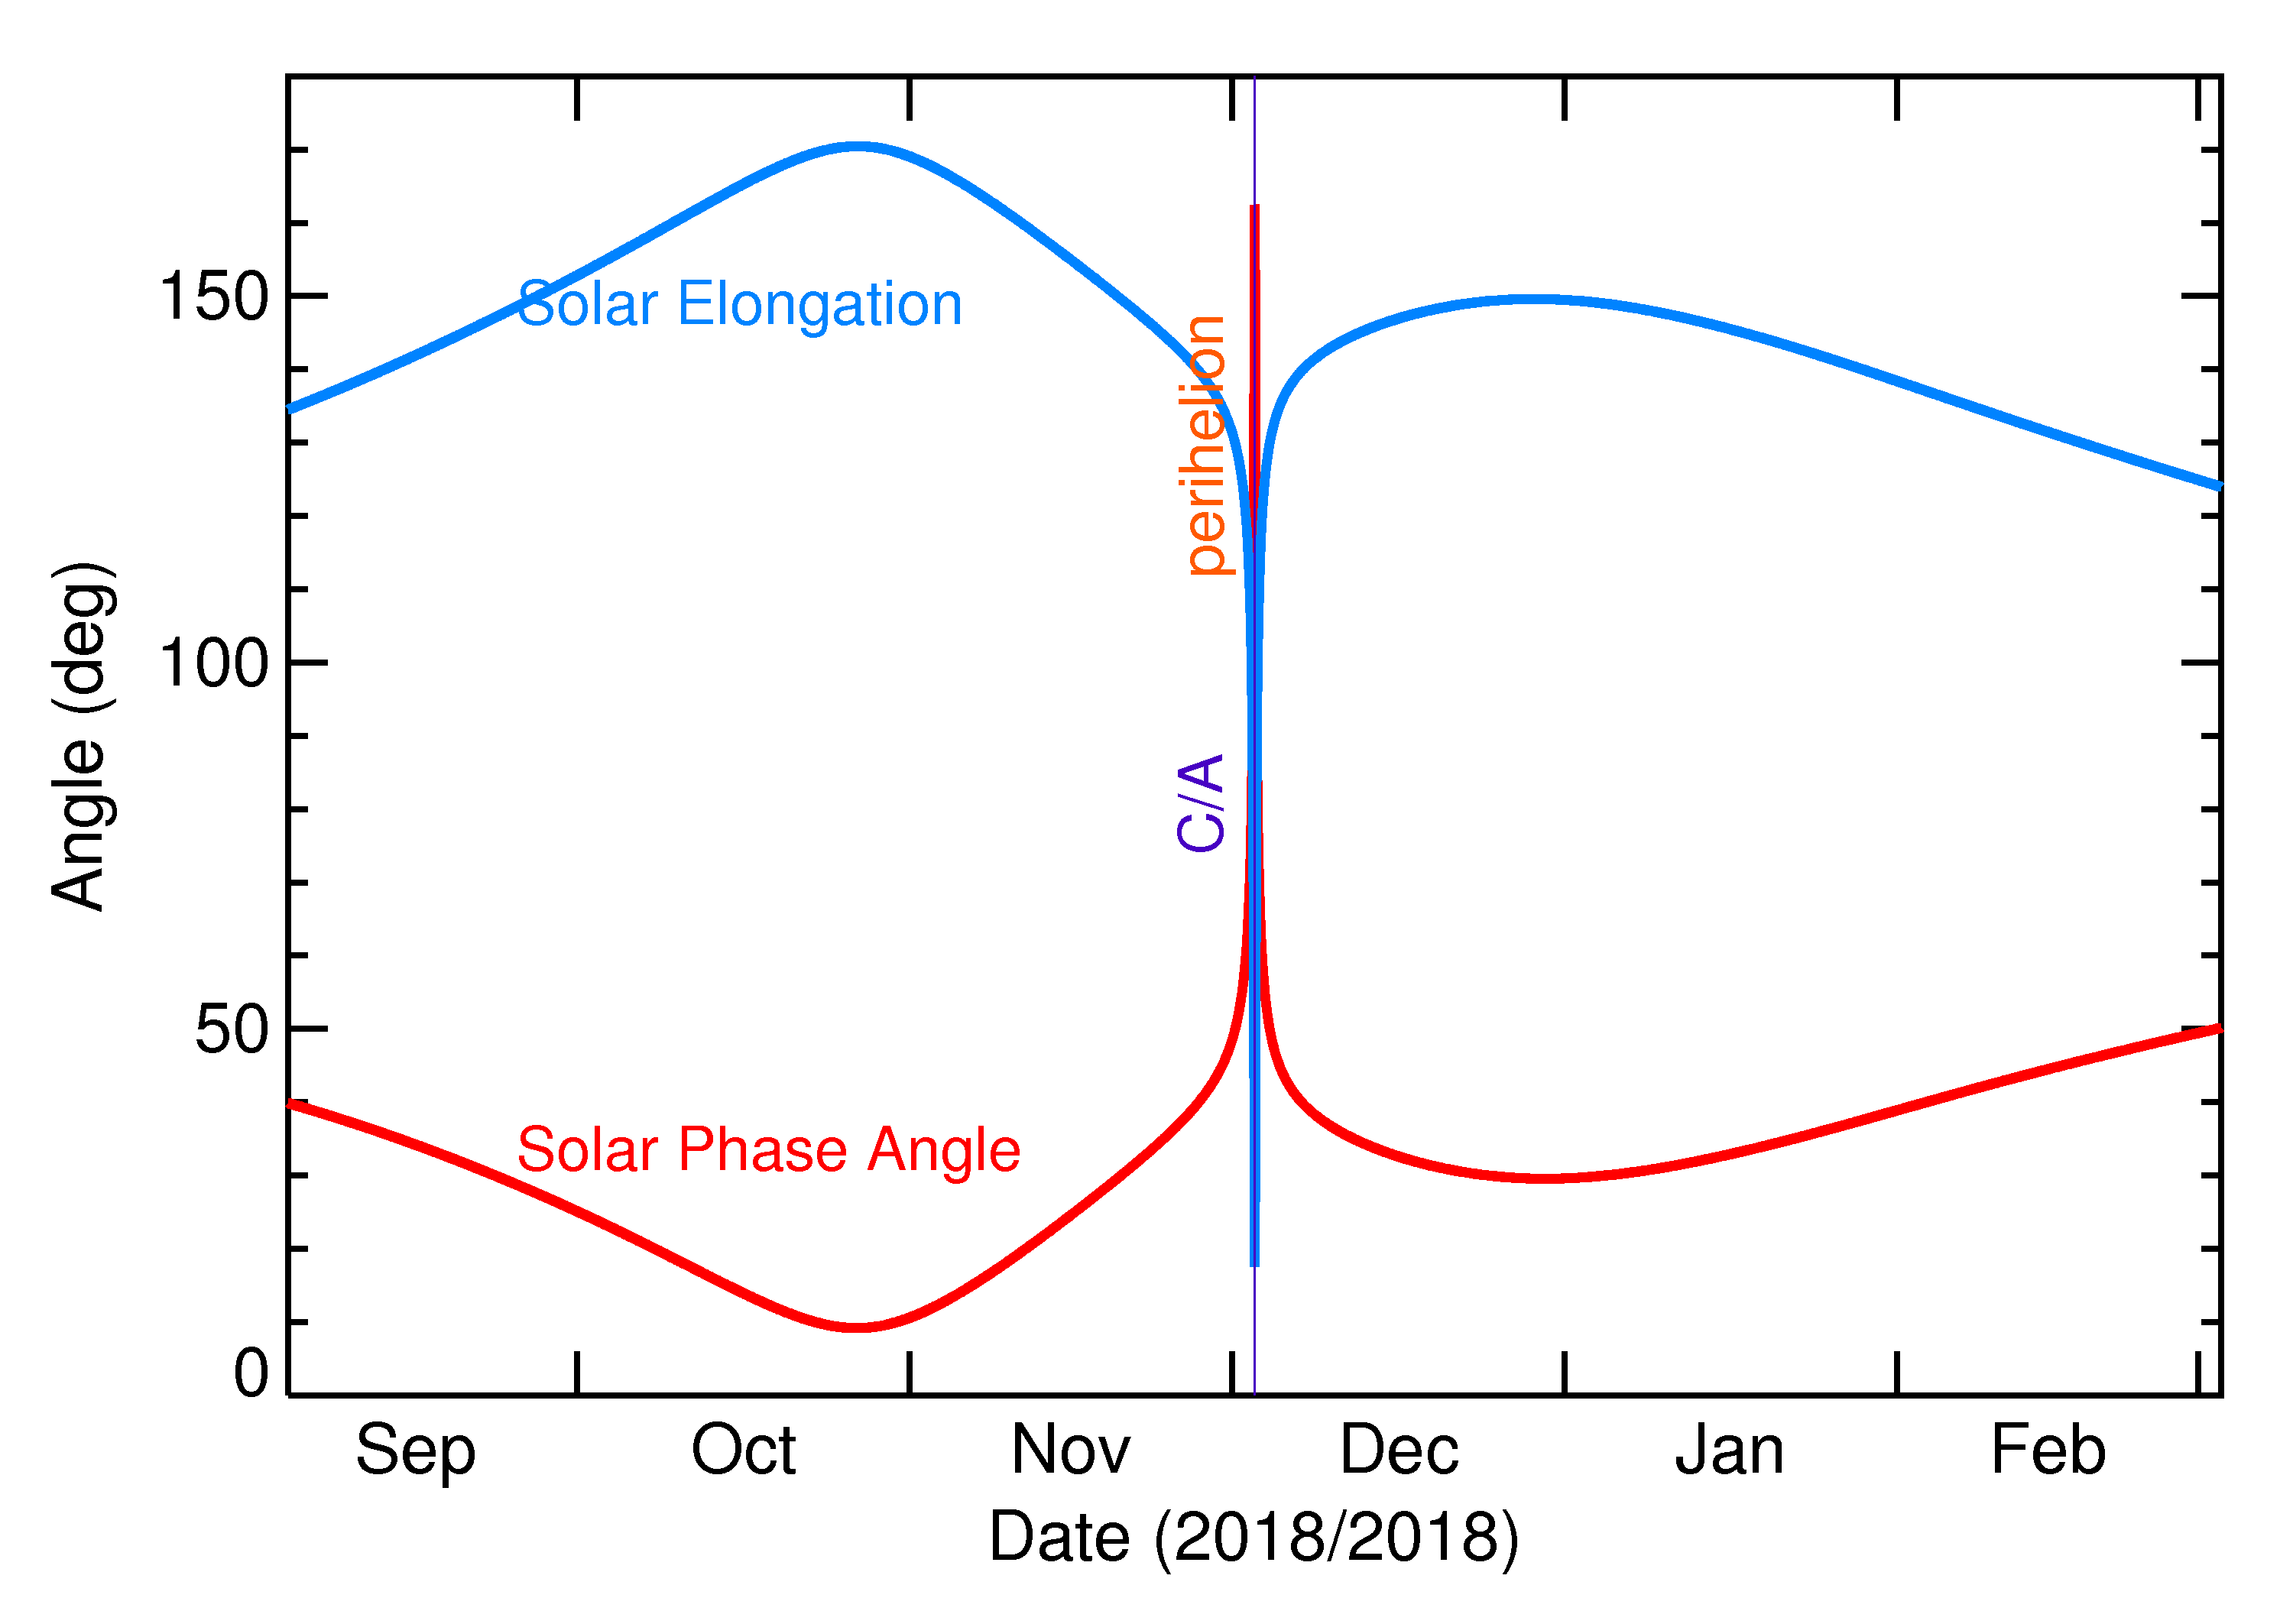 Solar Elongation and Solar Phase Angle of 2018 WV1 in the months around closest approach